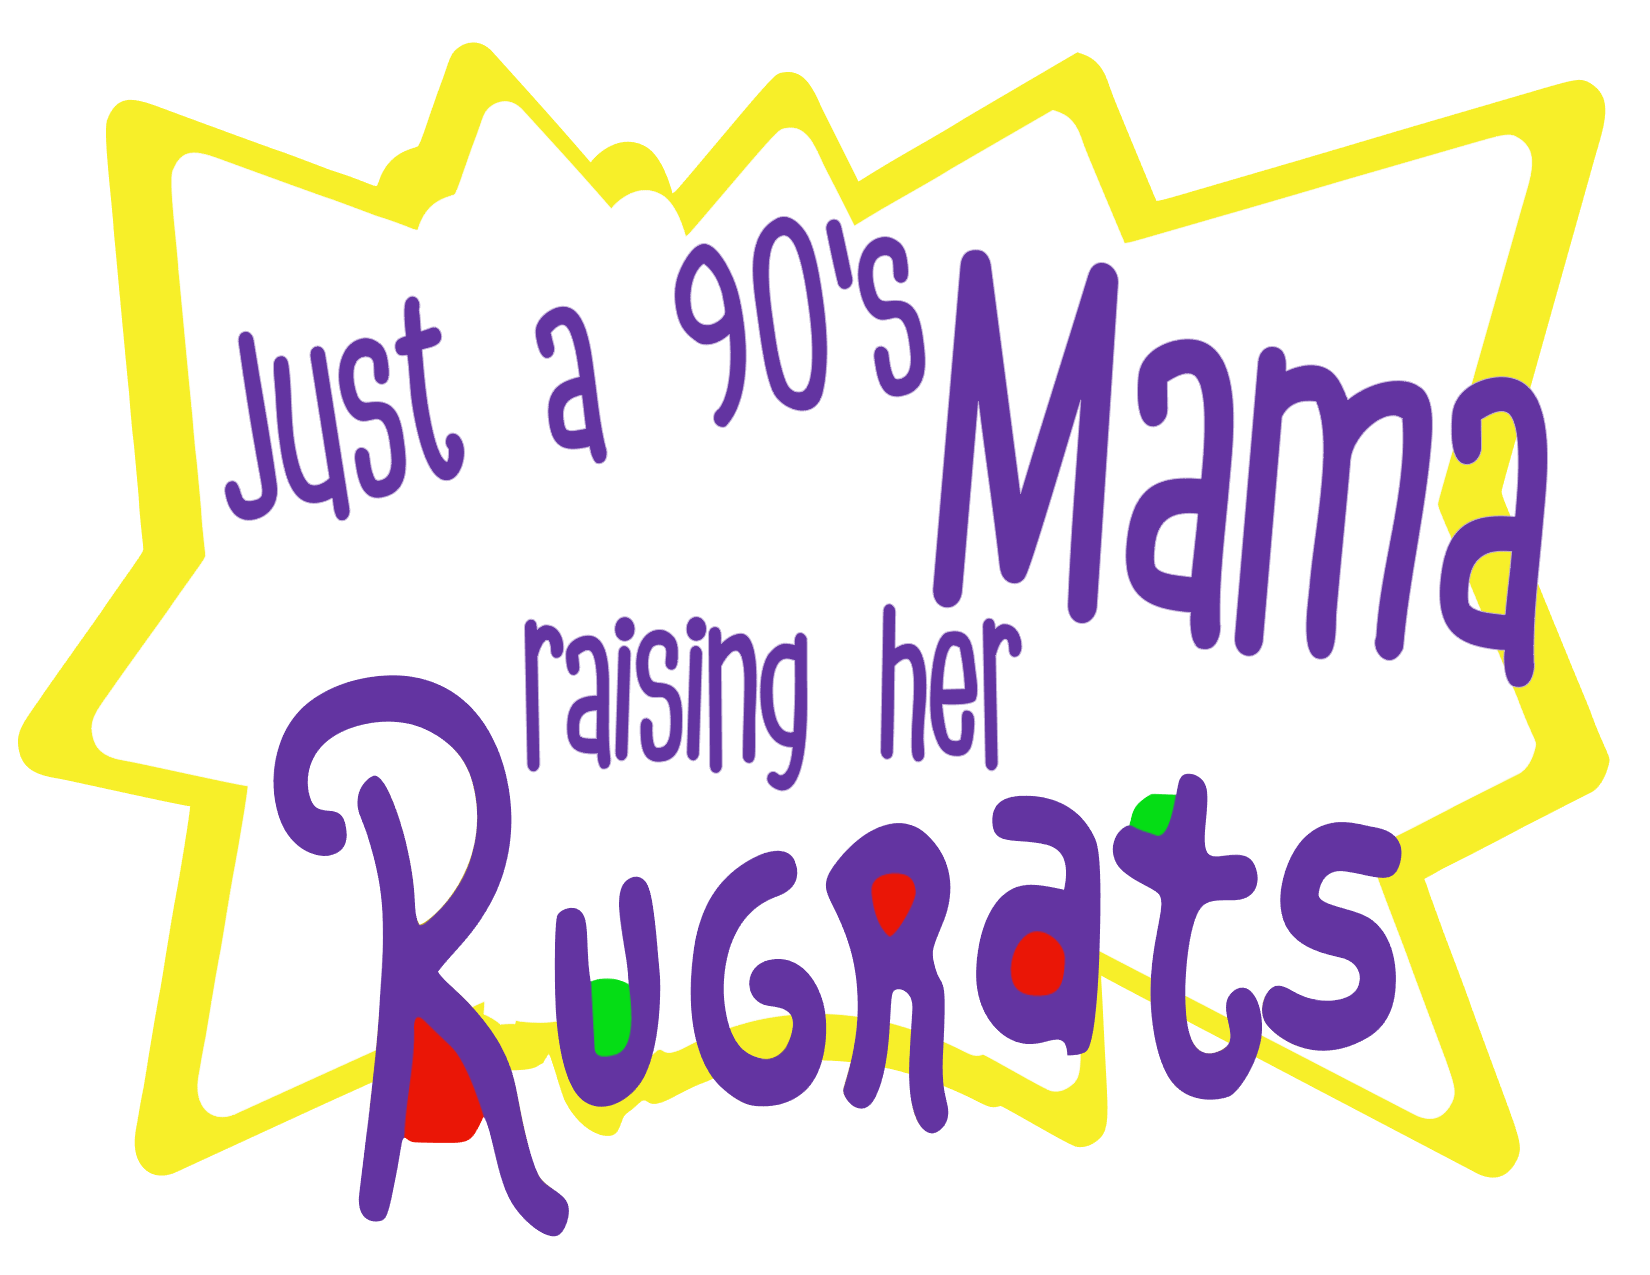 #328 Just a 90's Mama raising her Rugrats(can me any name)